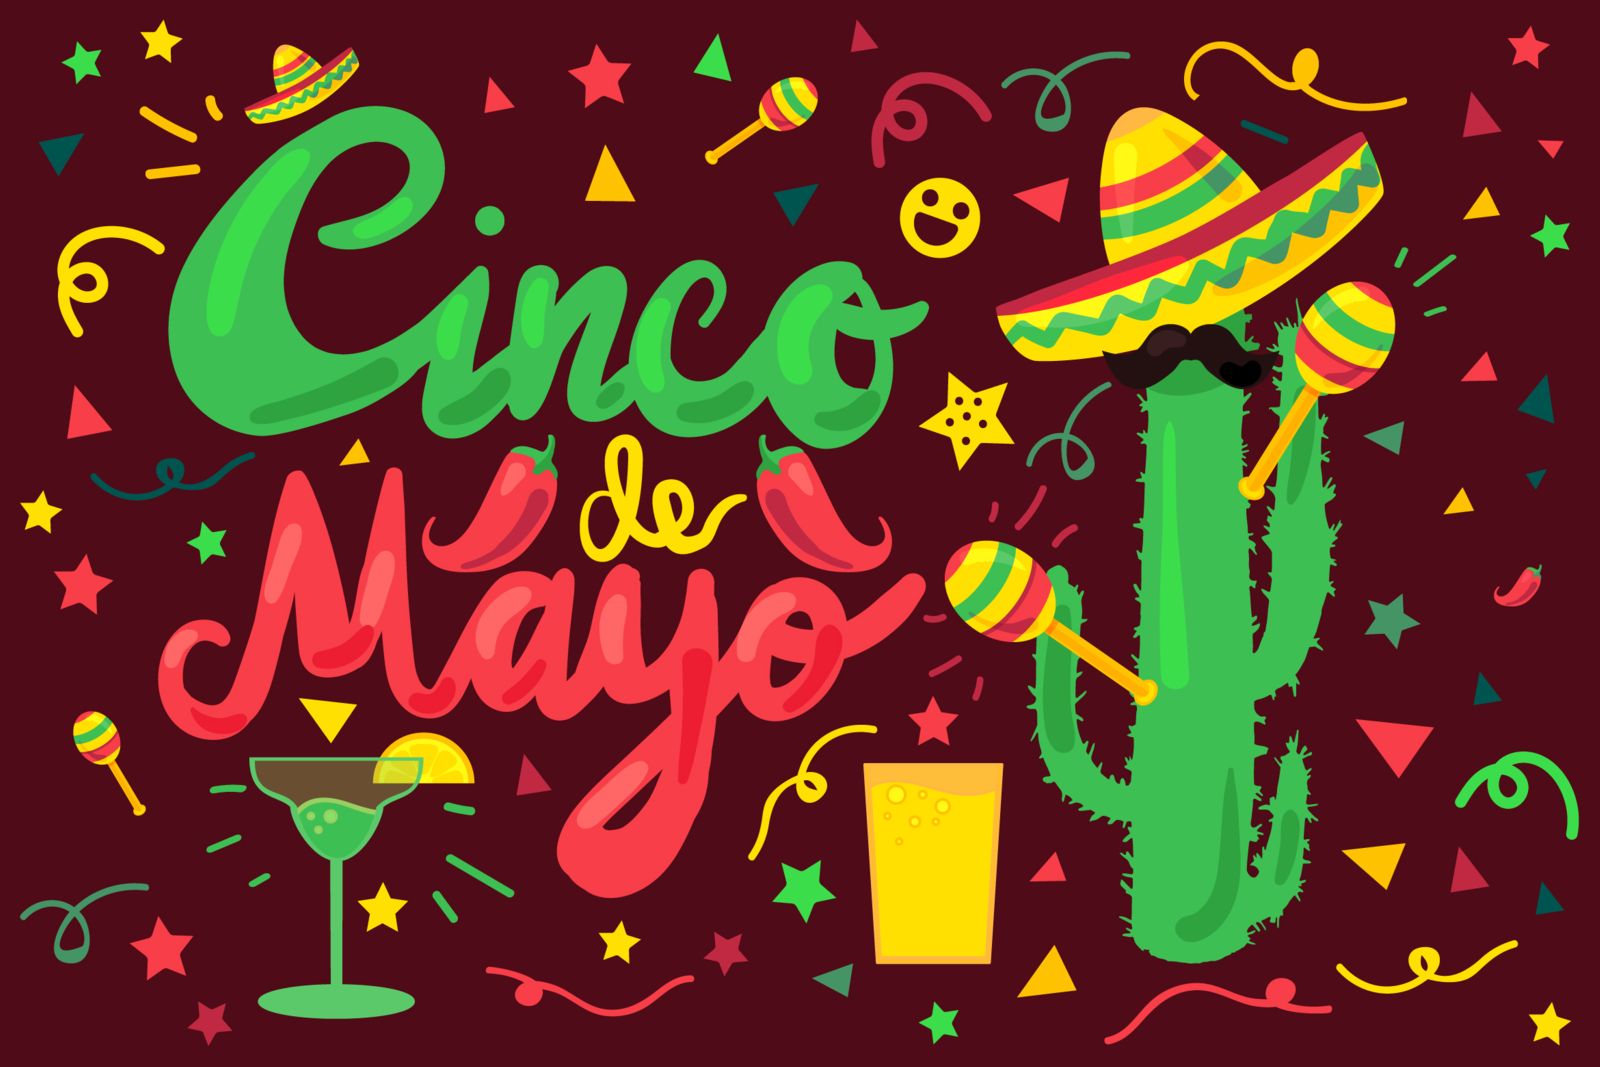 5 at-home cocktail recipes for Cinco de Mayo from DUI defense attorneys